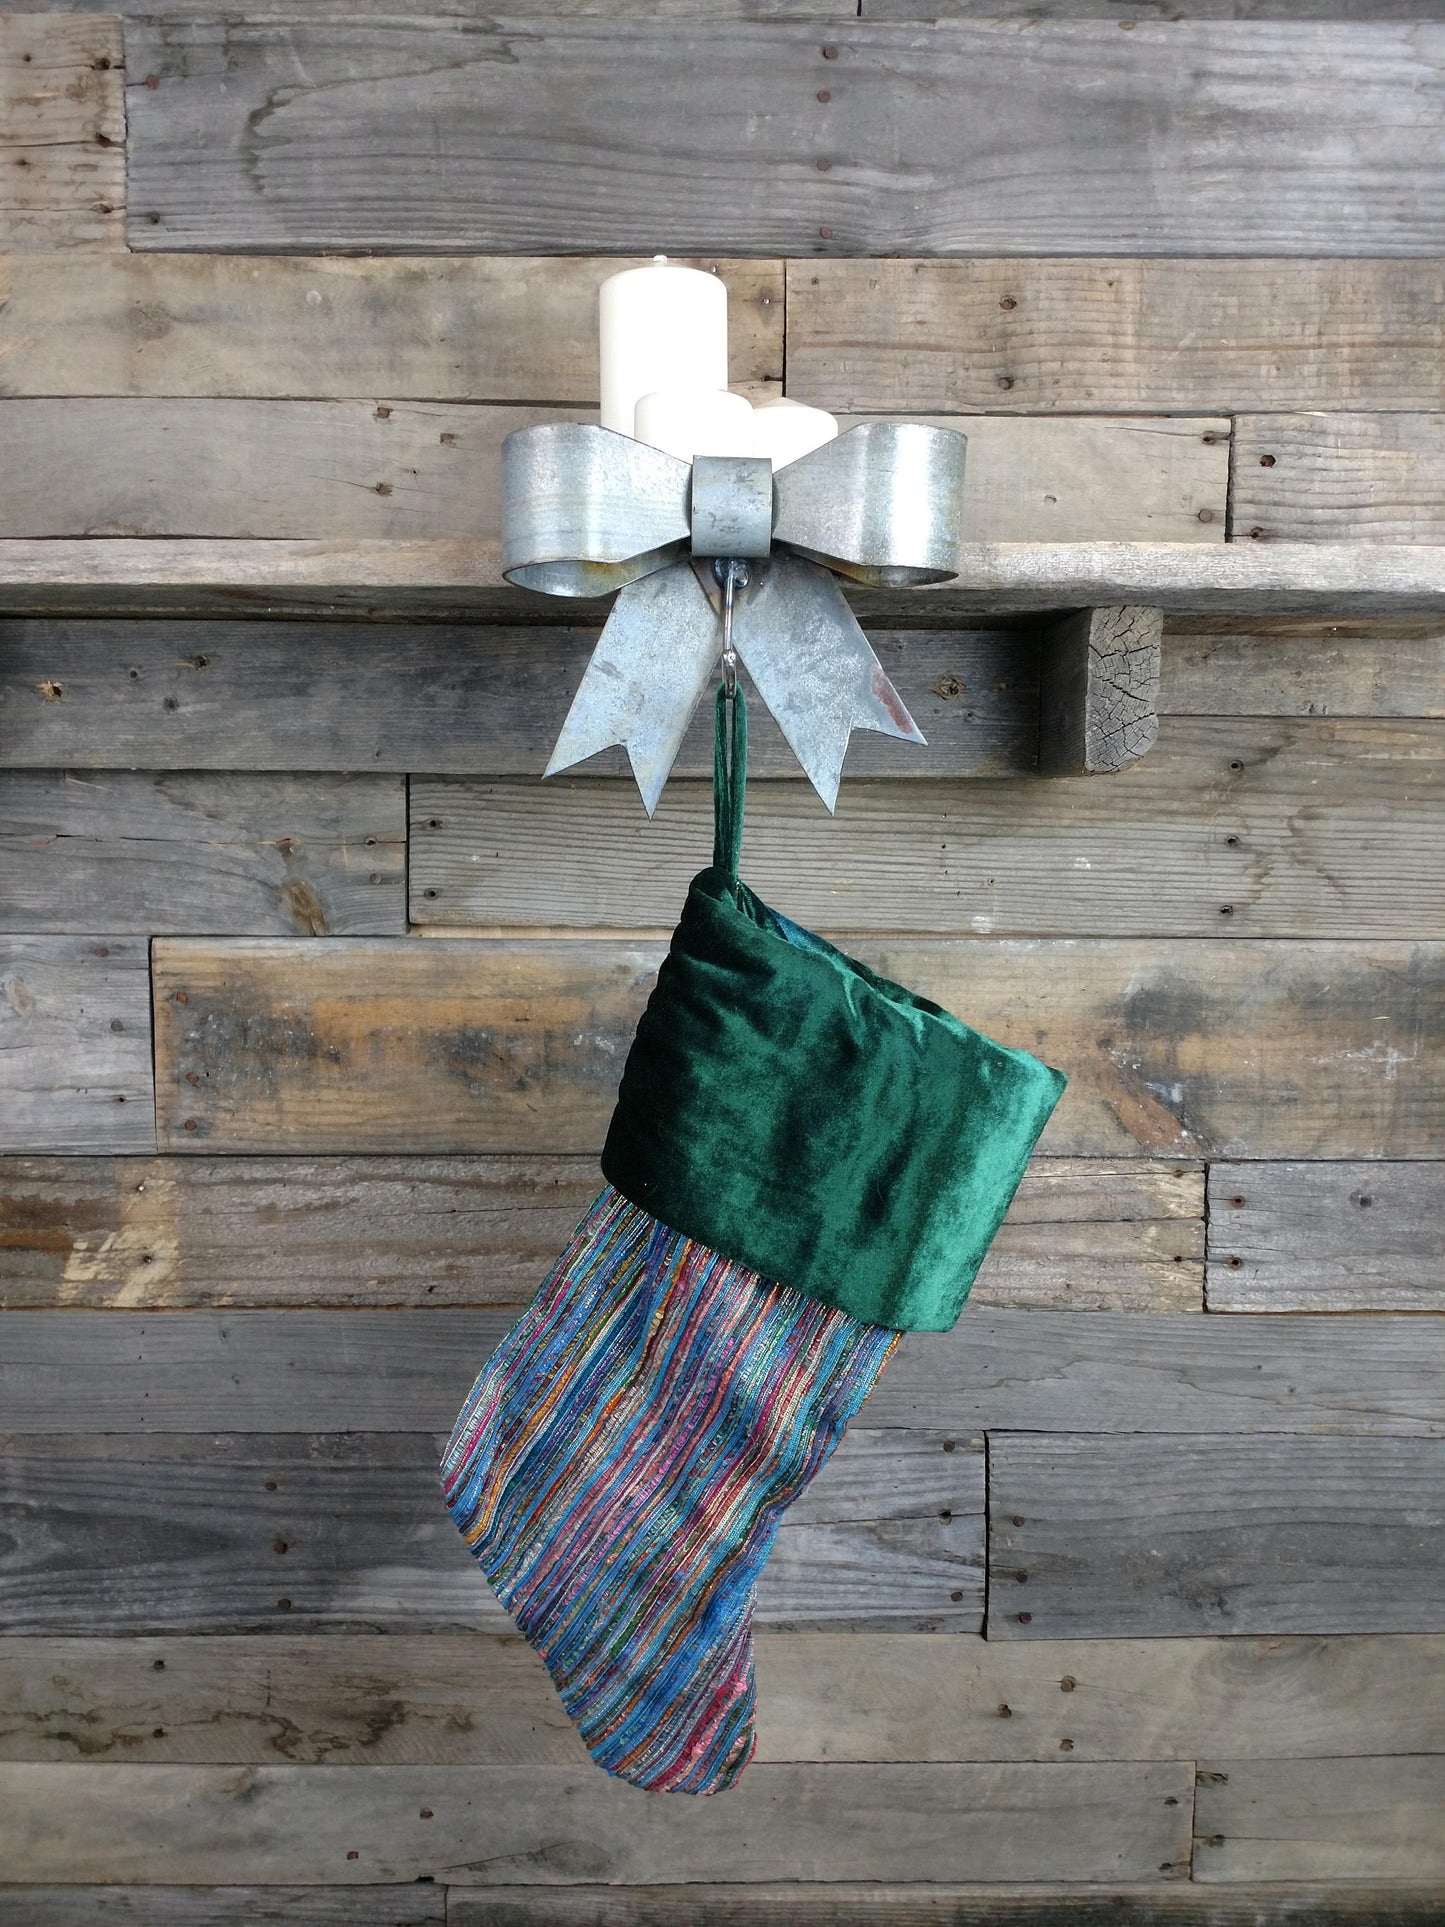 Wine Barrel Ring Bow Stocking Holder - Totini - Made from retired California wine barrel rings. 100% Recycled!